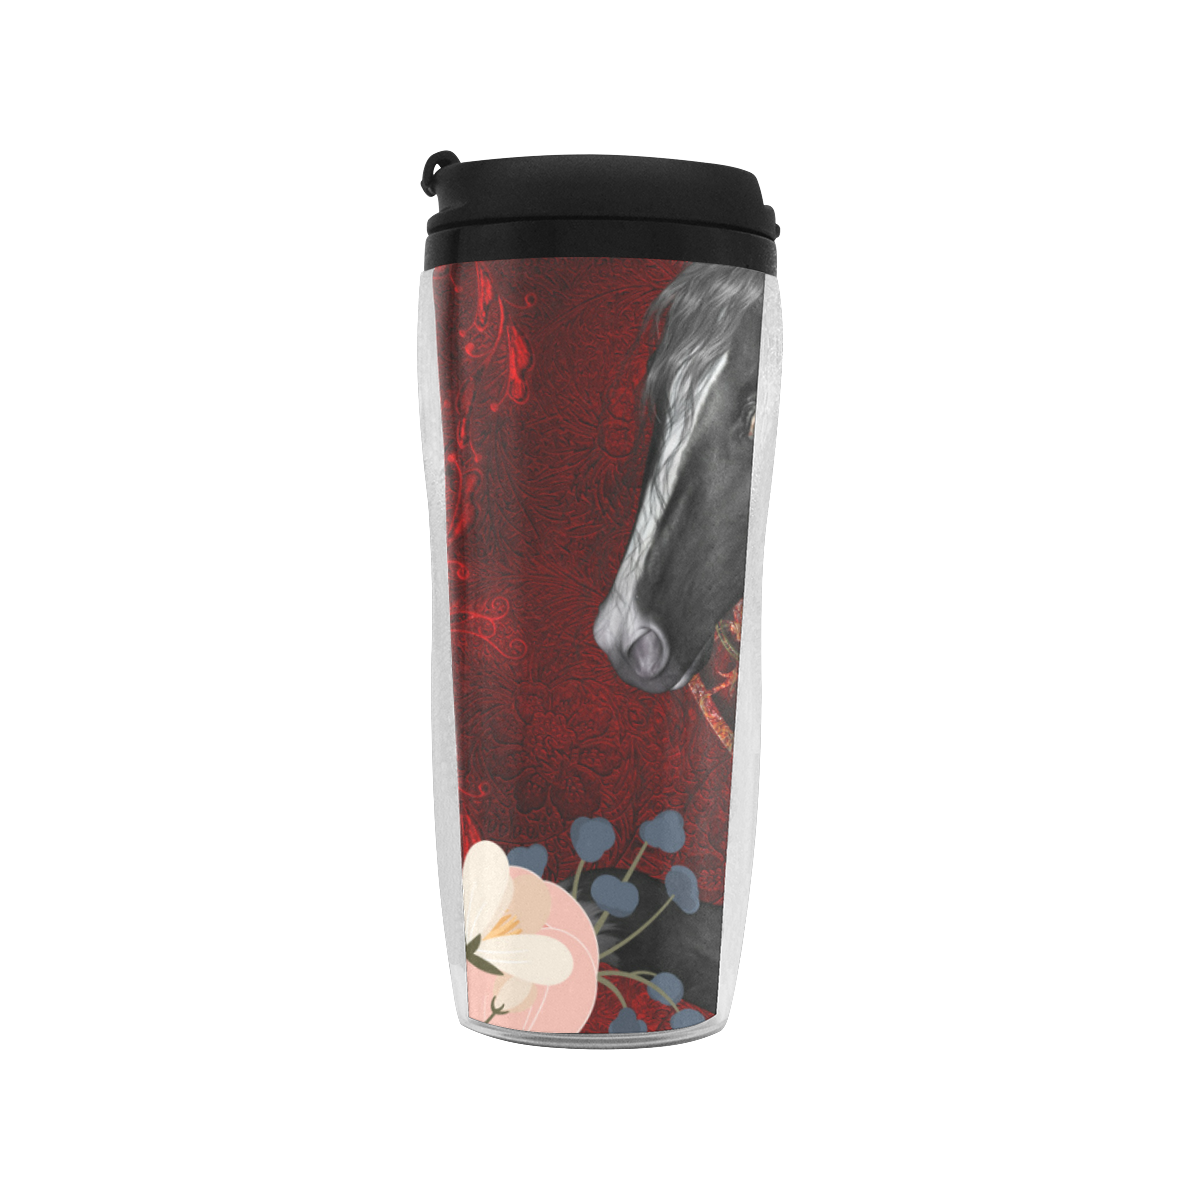 Black horse with flowers Reusable Coffee Cup (11.8oz)